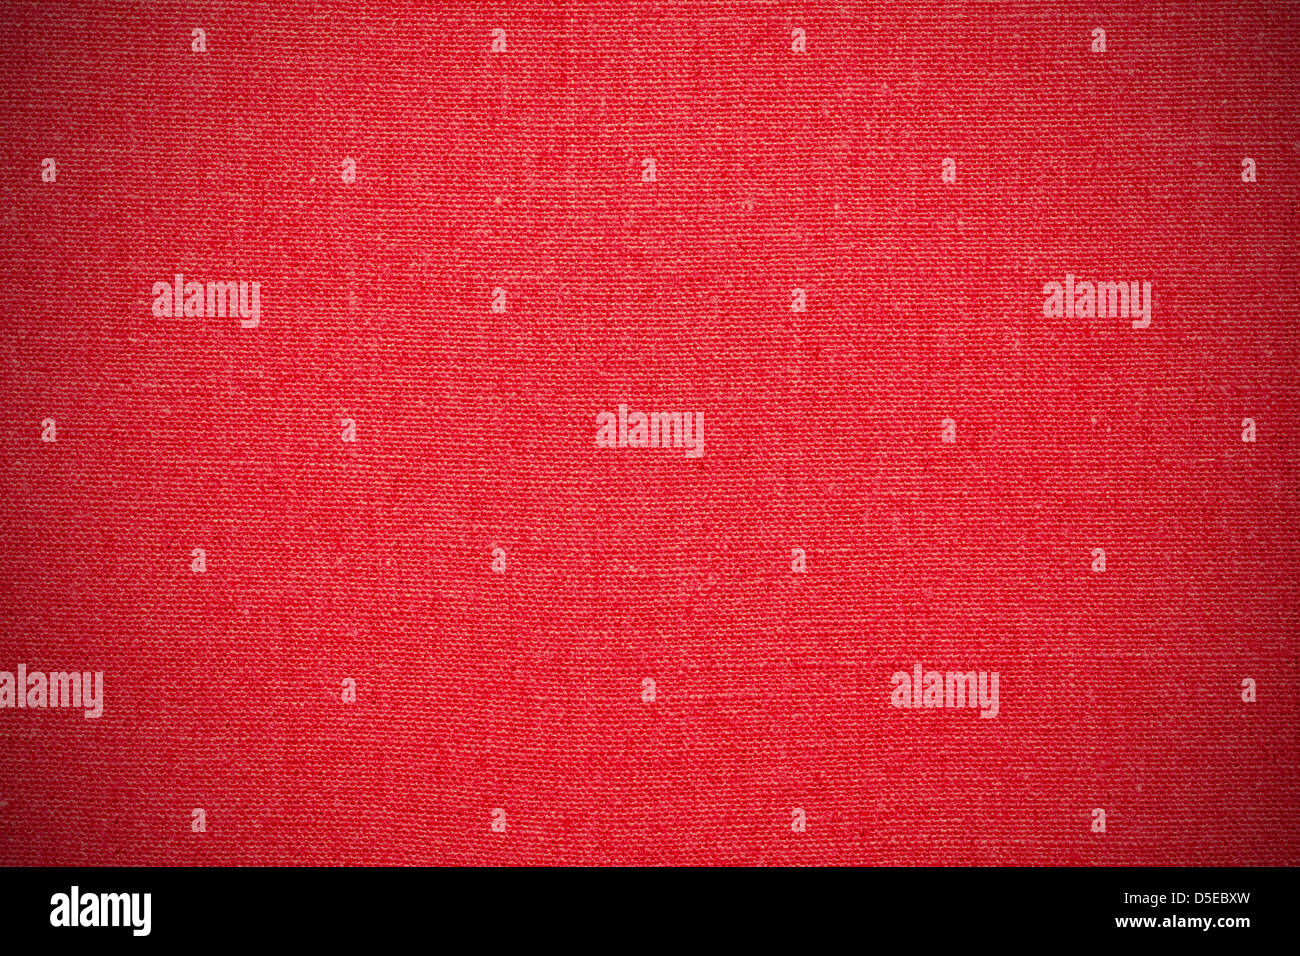 red canvas background or color linen texture Stock Photo